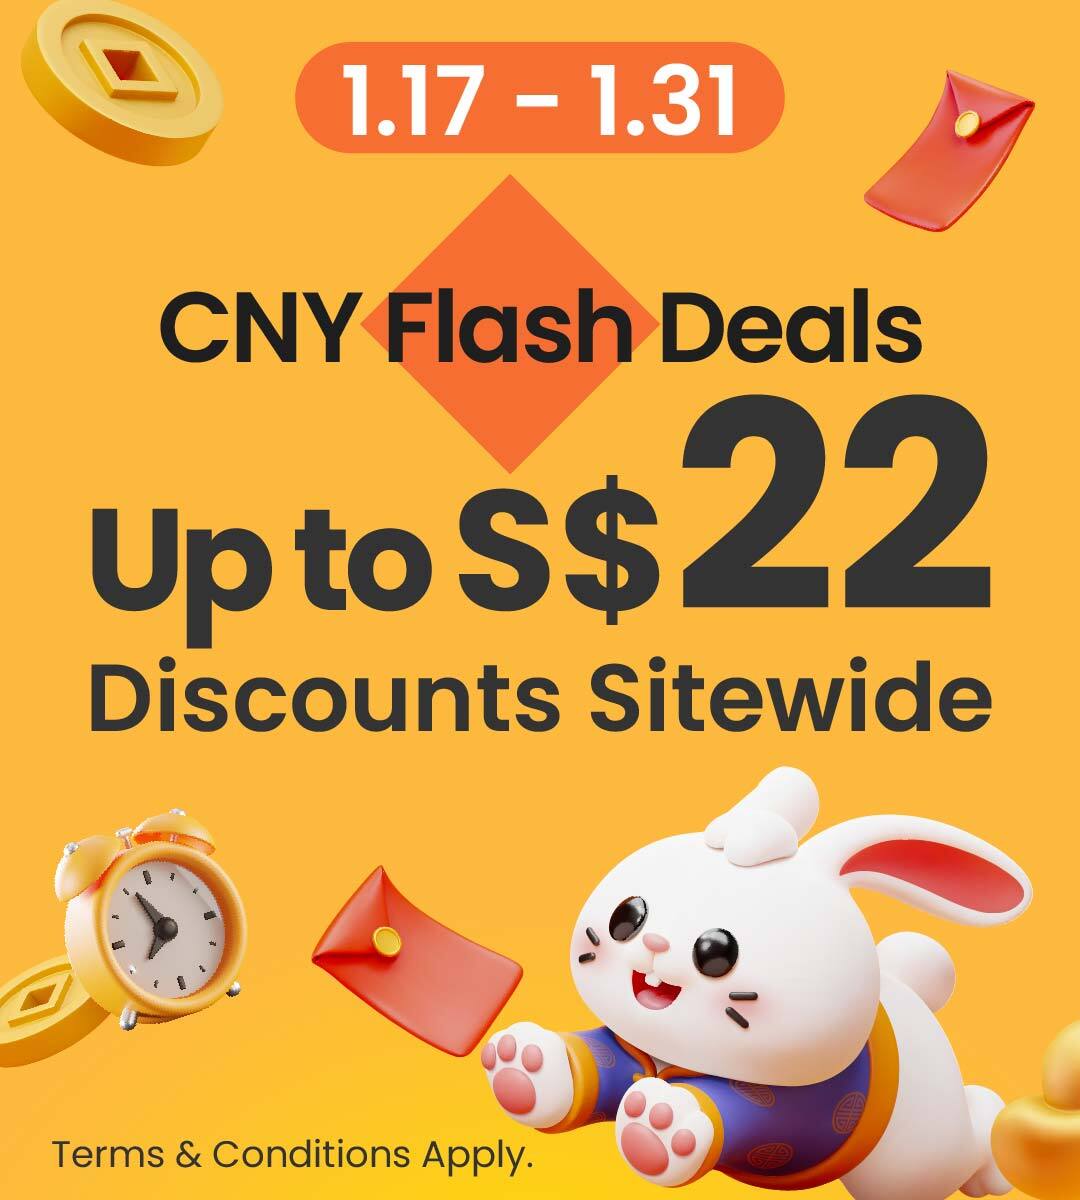 Get up to S$22 Discounts Sitewide this CNY!